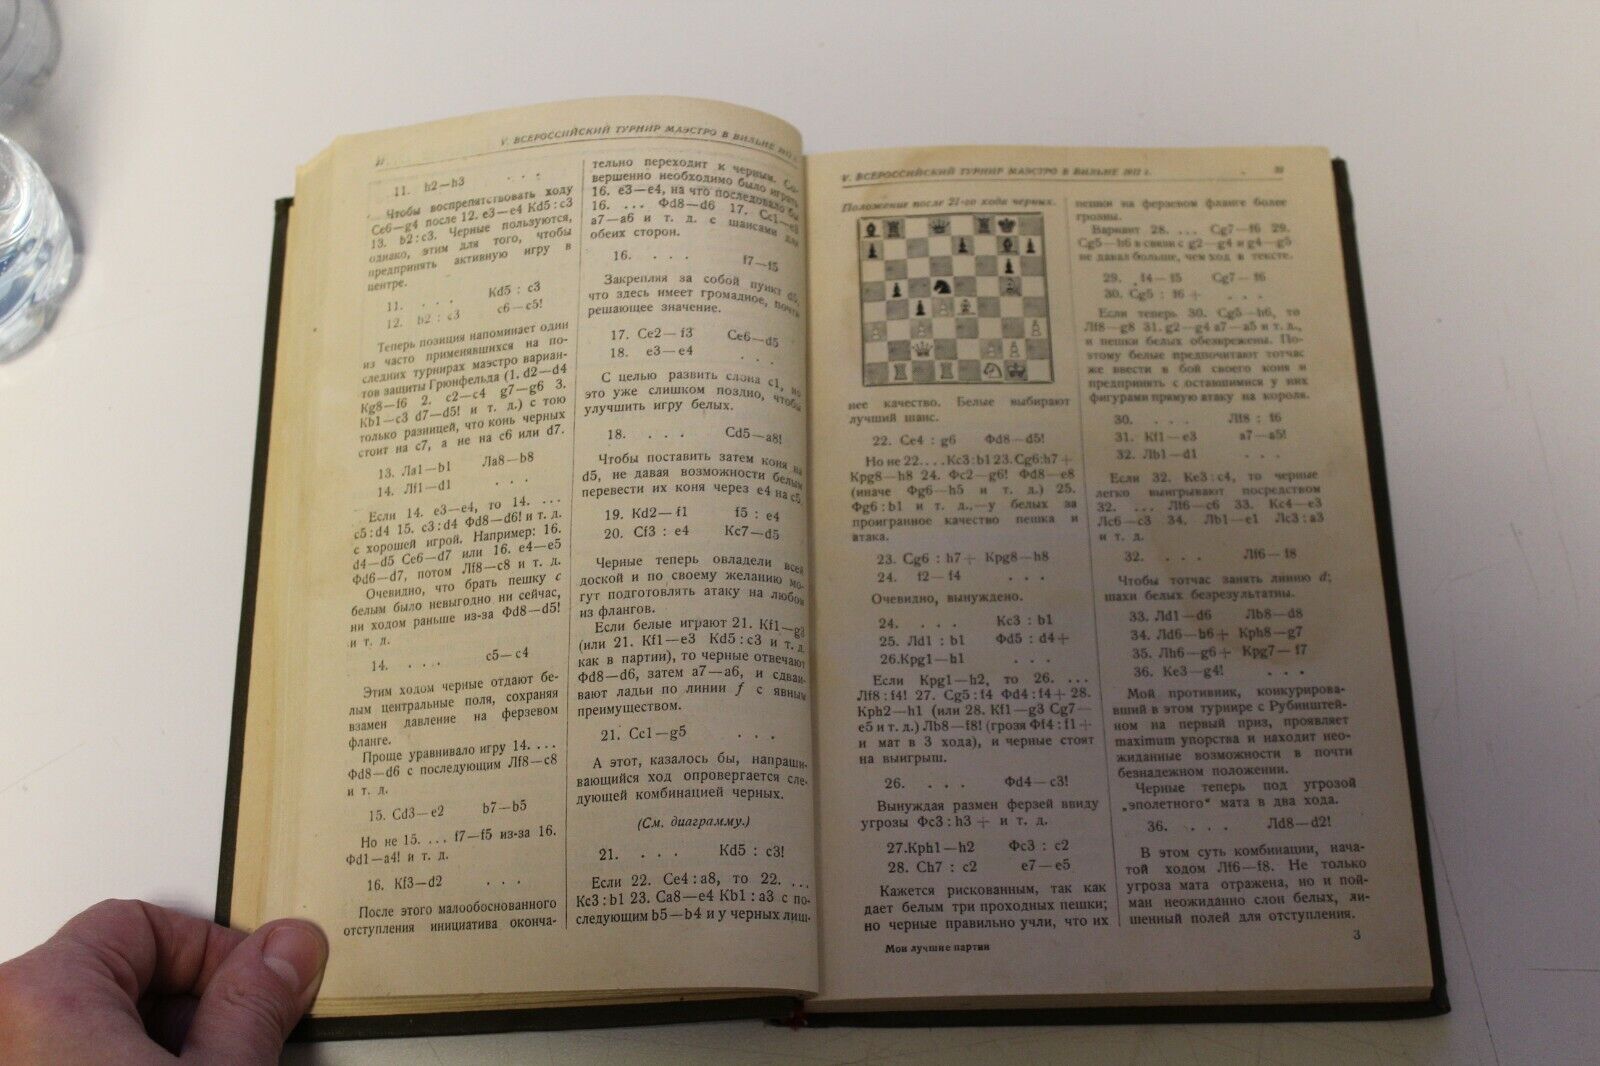 10857.Antique Russian Chess Book: A.Alekhine. My best games. Moscow. 1928